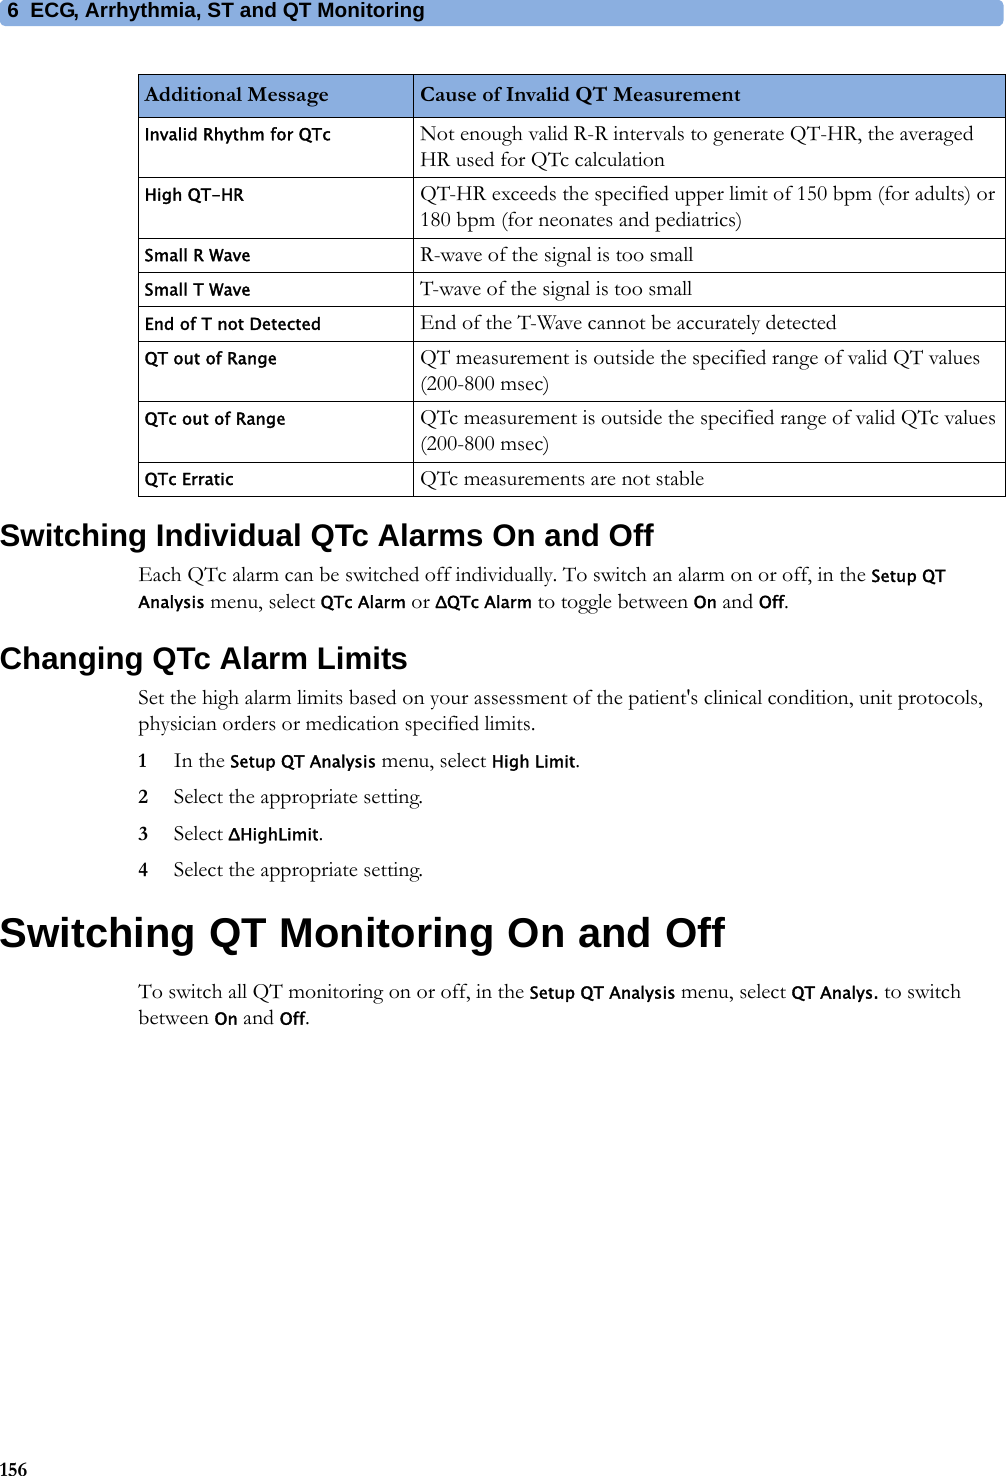 6 ECG, Arrhythmia, ST and QT Monitoring156Switching Individual QTc Alarms On and OffEach QTc alarm can be switched off individually. To switch an alarm on or off, in the Setup QT Analysis menu, select QTc Alarm or ΔQTc Alarm to toggle between On and Off.Changing QTc Alarm LimitsSet the high alarm limits based on your assessment of the patient&apos;s clinical condition, unit protocols, physician orders or medication specified limits.1In the Setup QT Analysis menu, select High Limit.2Select the appropriate setting.3Select ΔHighLimit.4Select the appropriate setting.Switching QT Monitoring On and OffTo switch all QT monitoring on or off, in the Setup QT Analysis menu, select QT Analys. to switch between On and Off.Invalid Rhythm for QTc Not enough valid R-R intervals to generate QT-HR, the averaged HR used for QTc calculationHigh QT-HR QT-HR exceeds the specified upper limit of 150 bpm (for adults) or 180 bpm (for neonates and pediatrics)Small R Wave R-wave of the signal is too smallSmall T Wave T-wave of the signal is too smallEnd of T not Detected End of the T-Wave cannot be accurately detectedQT out of Range QT measurement is outside the specified range of valid QT values (200-800 msec)QTc out of Range QTc measurement is outside the specified range of valid QTc values (200-800 msec)QTc Erratic QTc measurements are not stableAdditional Message Cause of Invalid QT Measurement